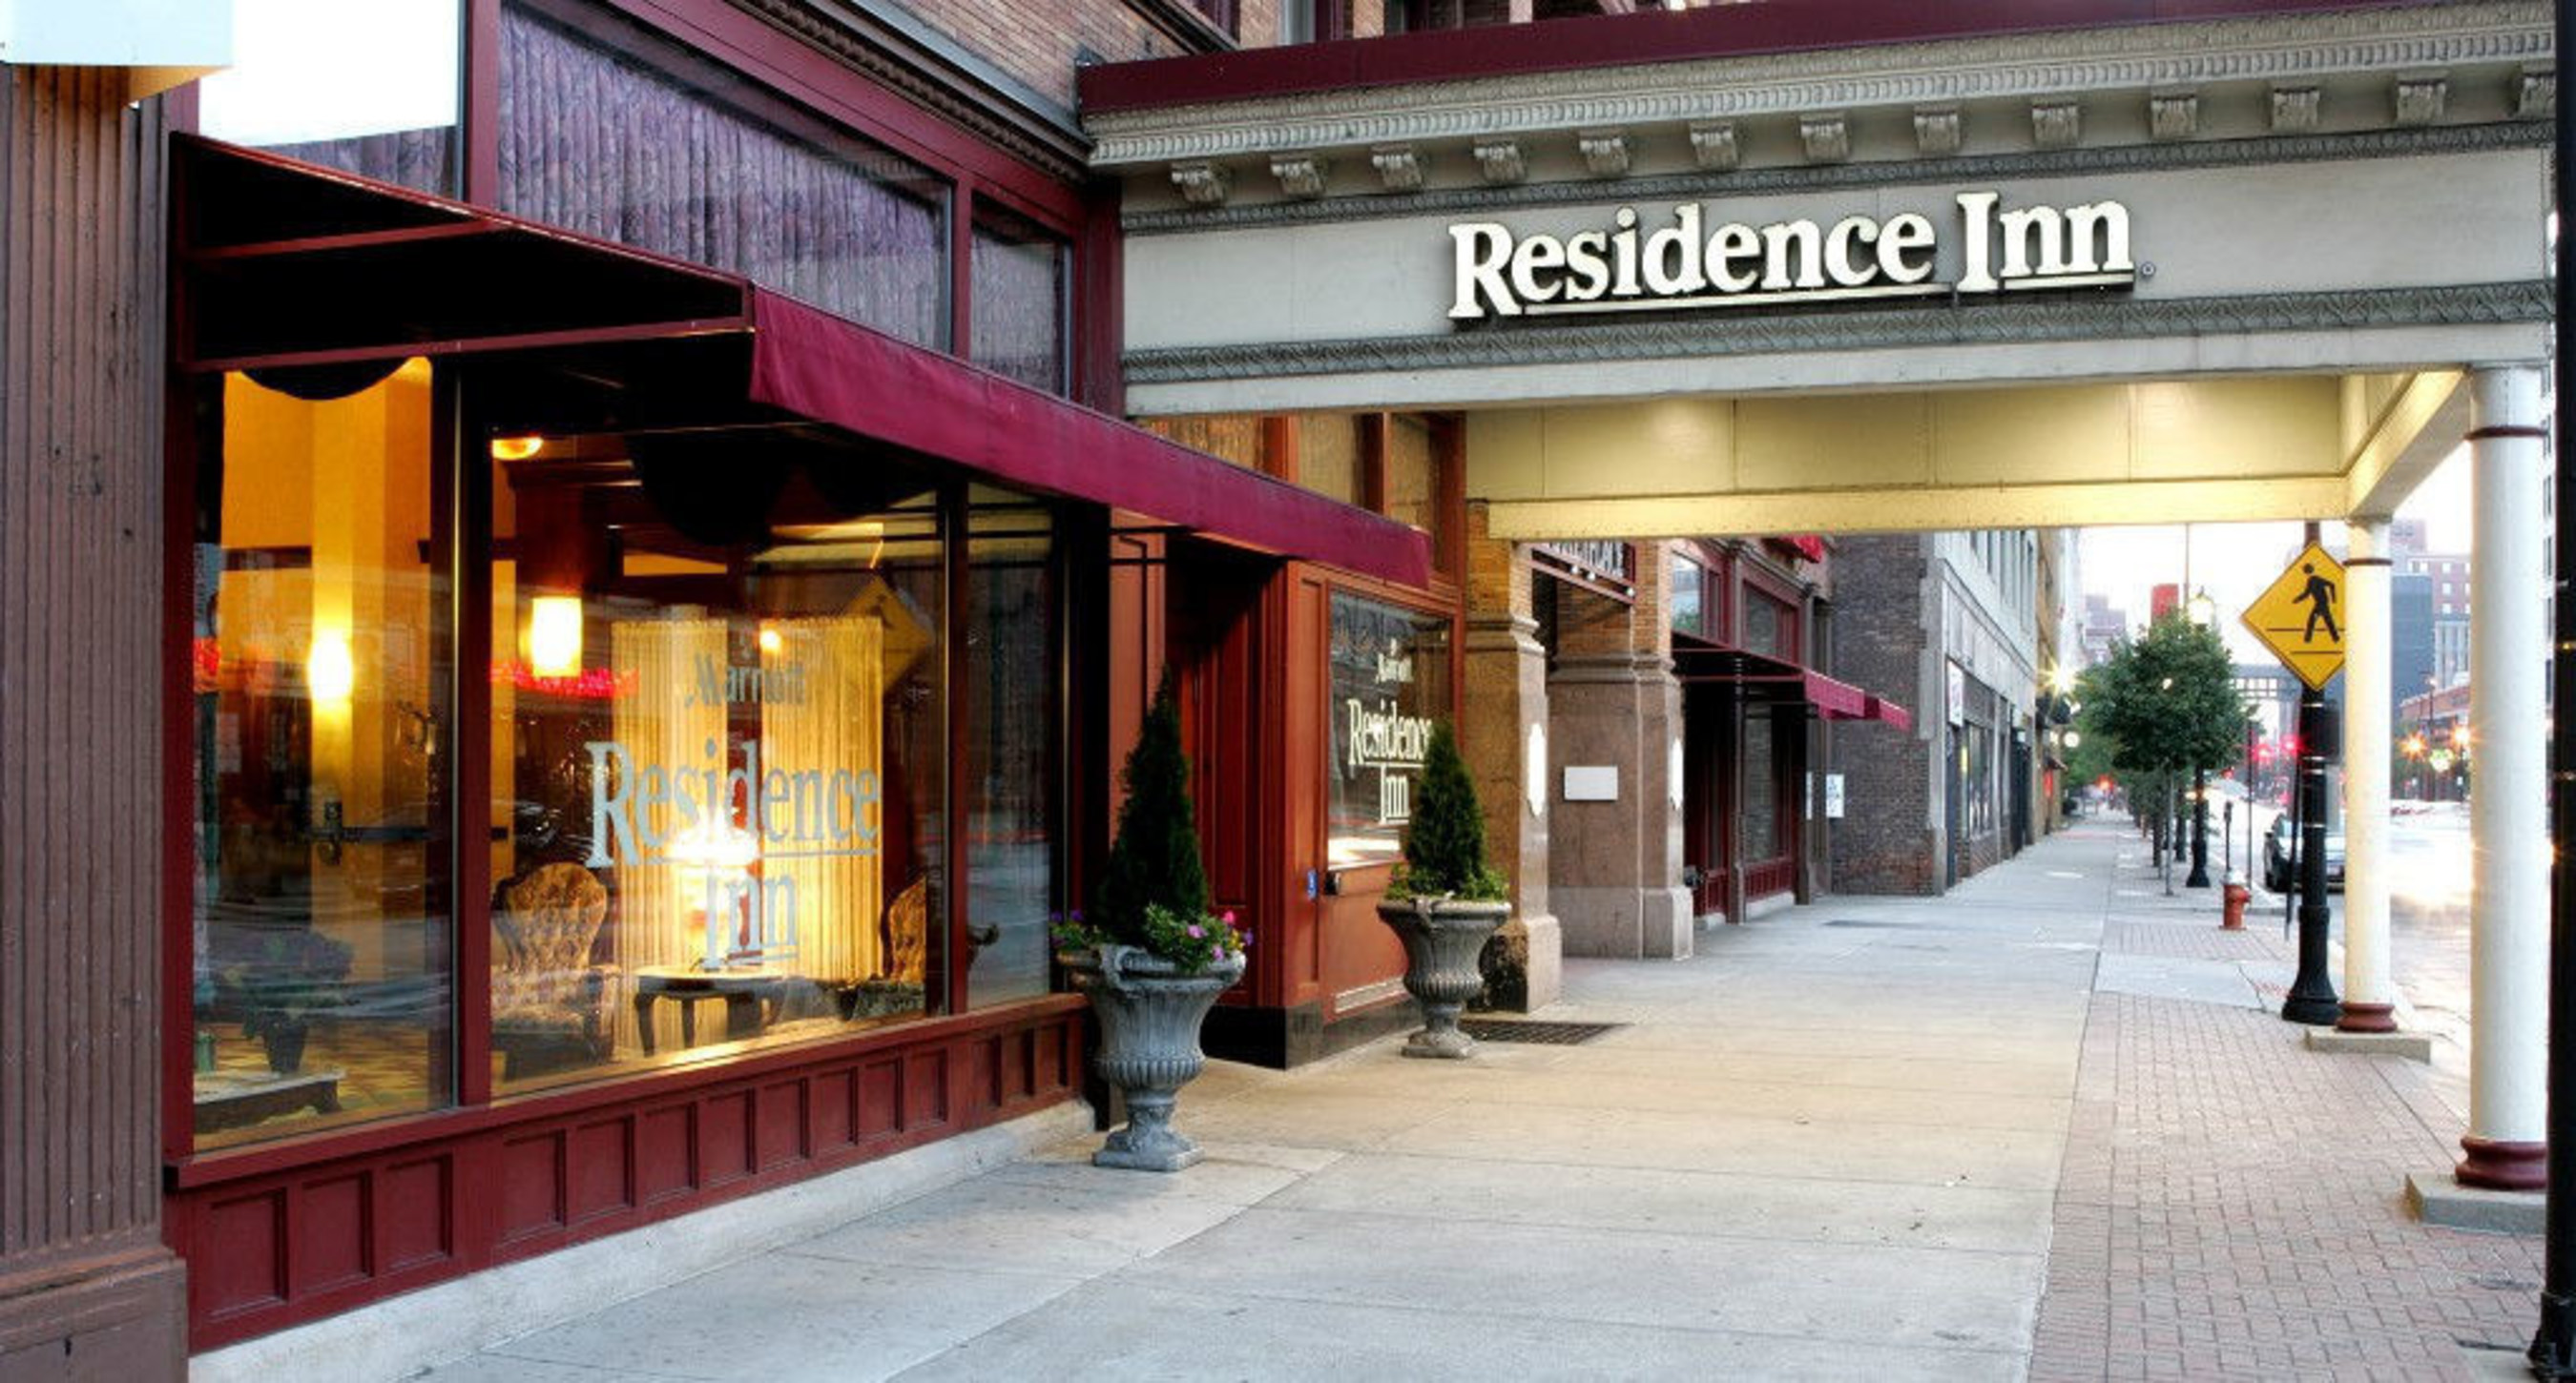 Residence Inn by Marriott Cleveland Downtown has completed a comprehensive renovation. Located in the heart of Cleveland's Historic Gateway neighborhood, the hotel has undergone a modern transformation while maintaining the historic charm of the 1800's architecture.